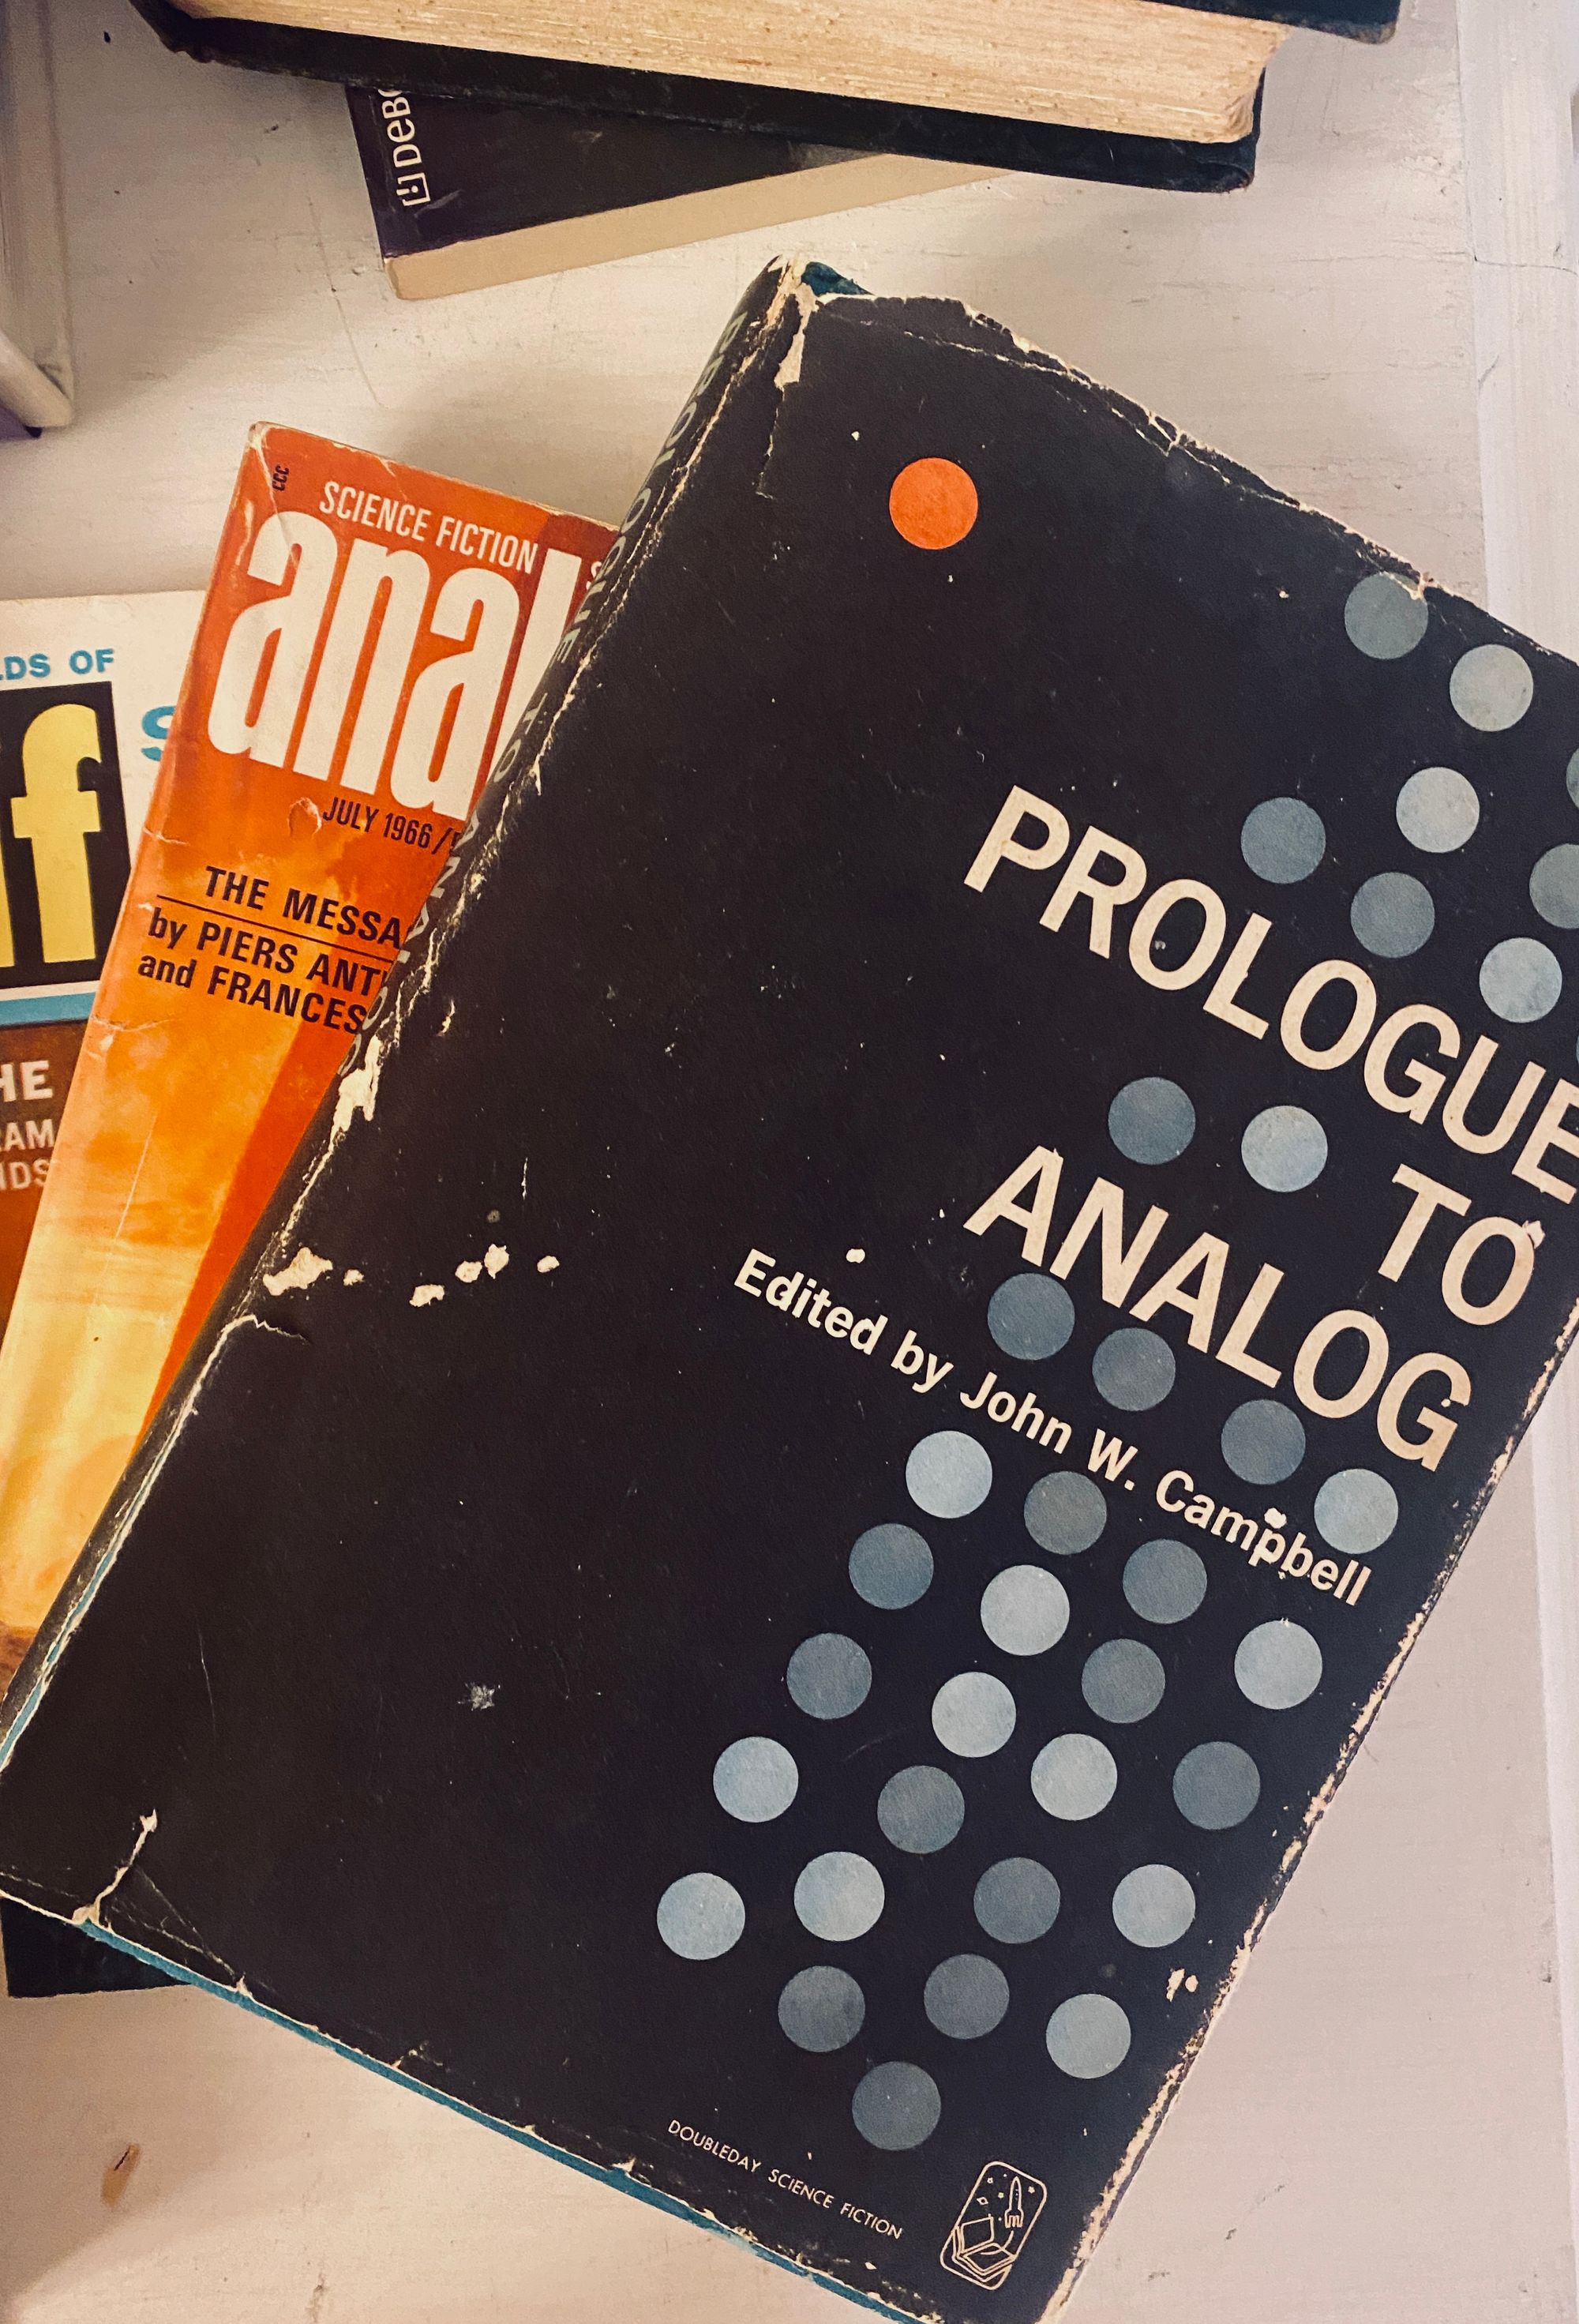 Science fiction books and magazines including Analog and Prologue to Analog. 